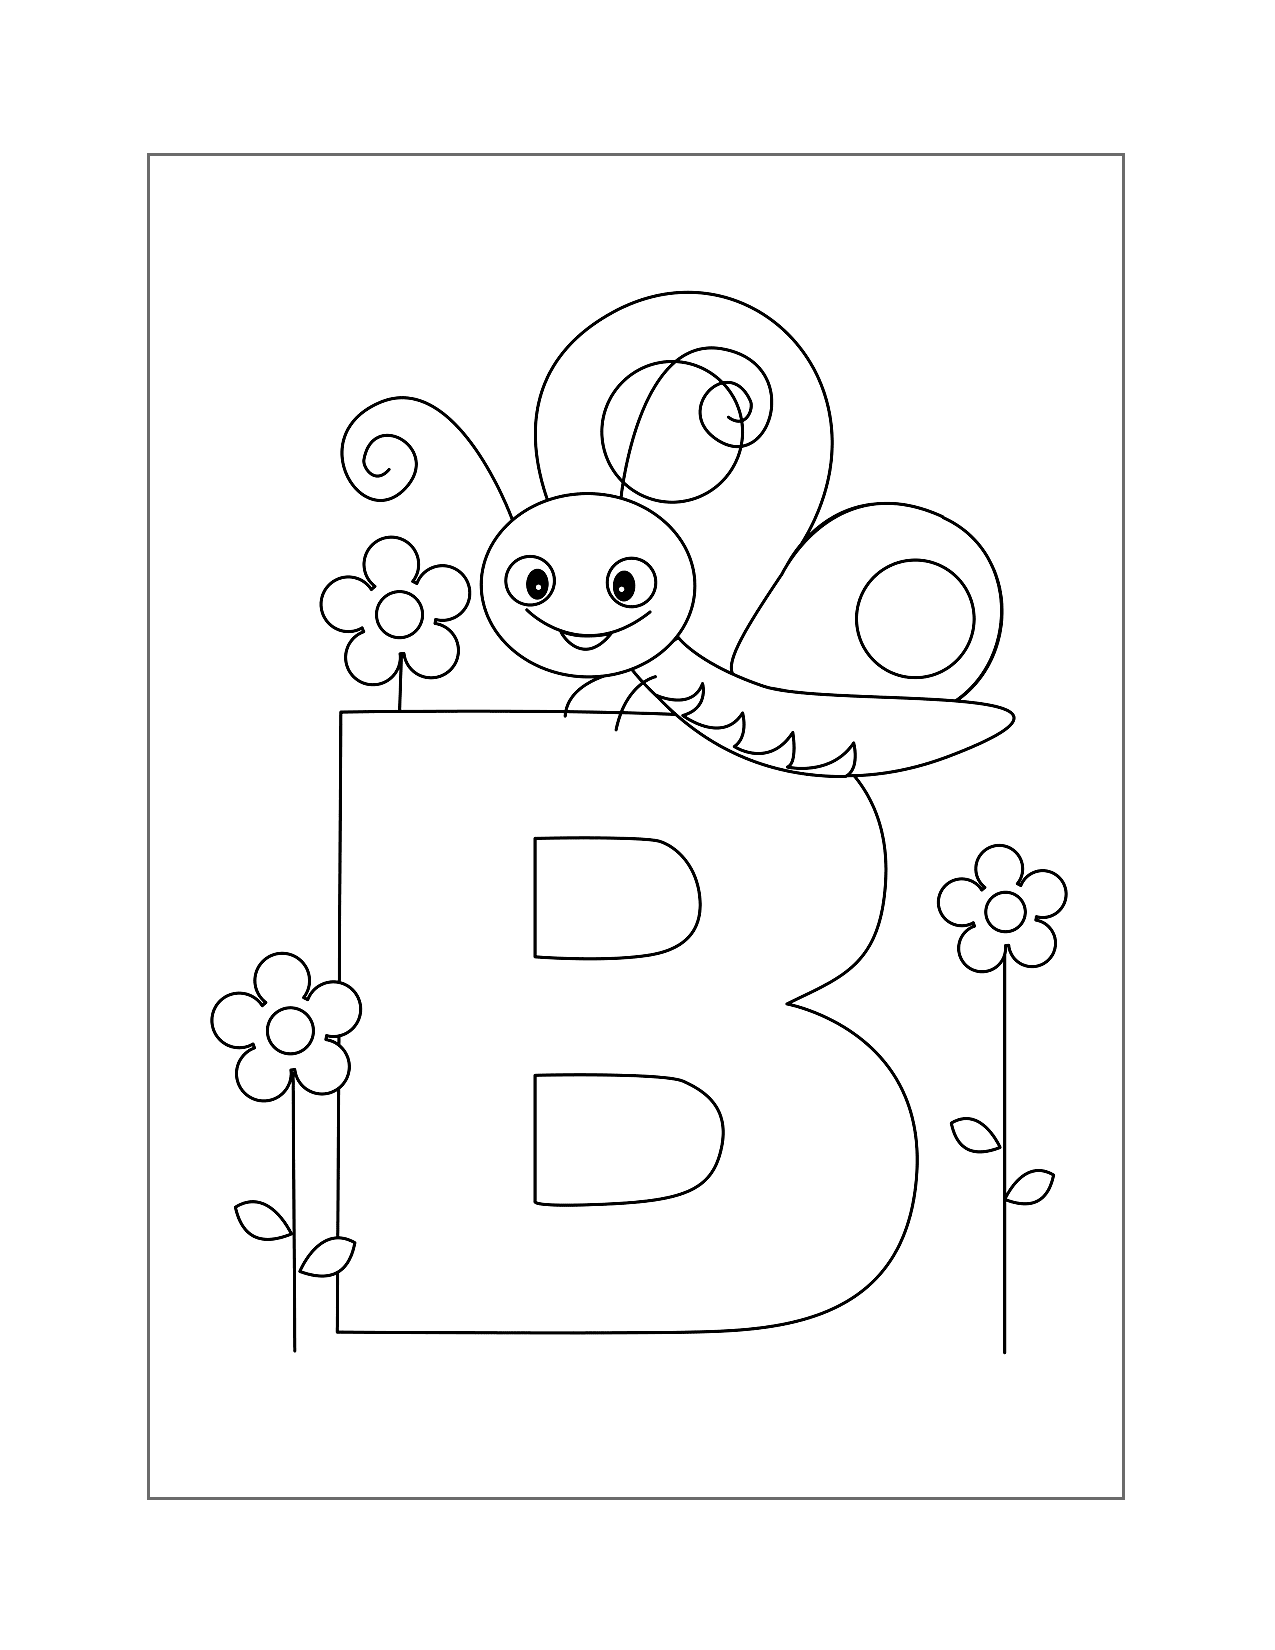 B For Bug Coloring Page